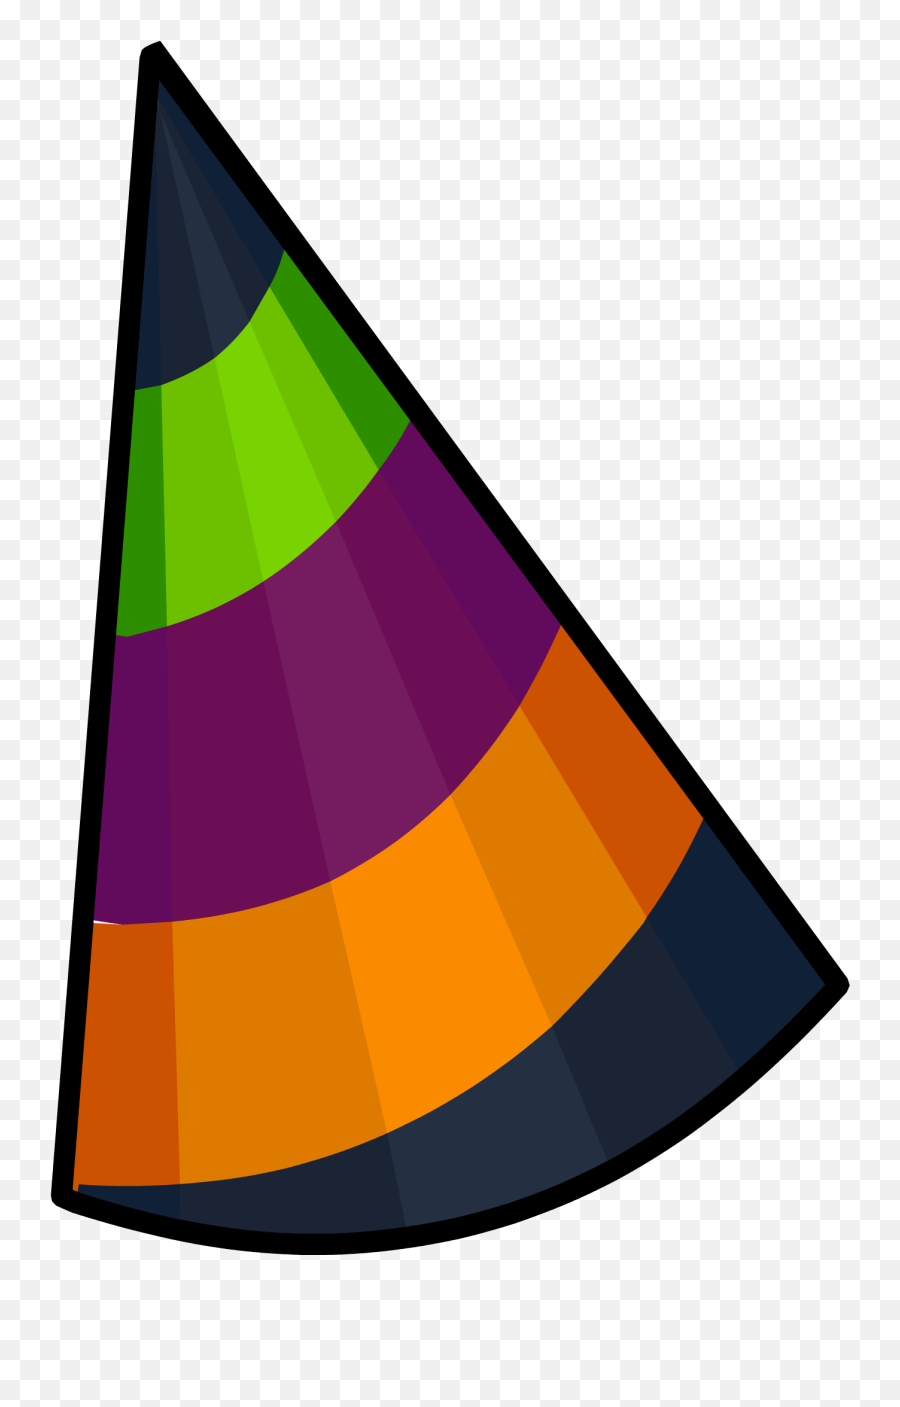 Image Party Hat Icon Png Club Penguin Emoticon Wikia Fandom - Club Penguin Party Hat Emoji,Emoticons Party Supplies